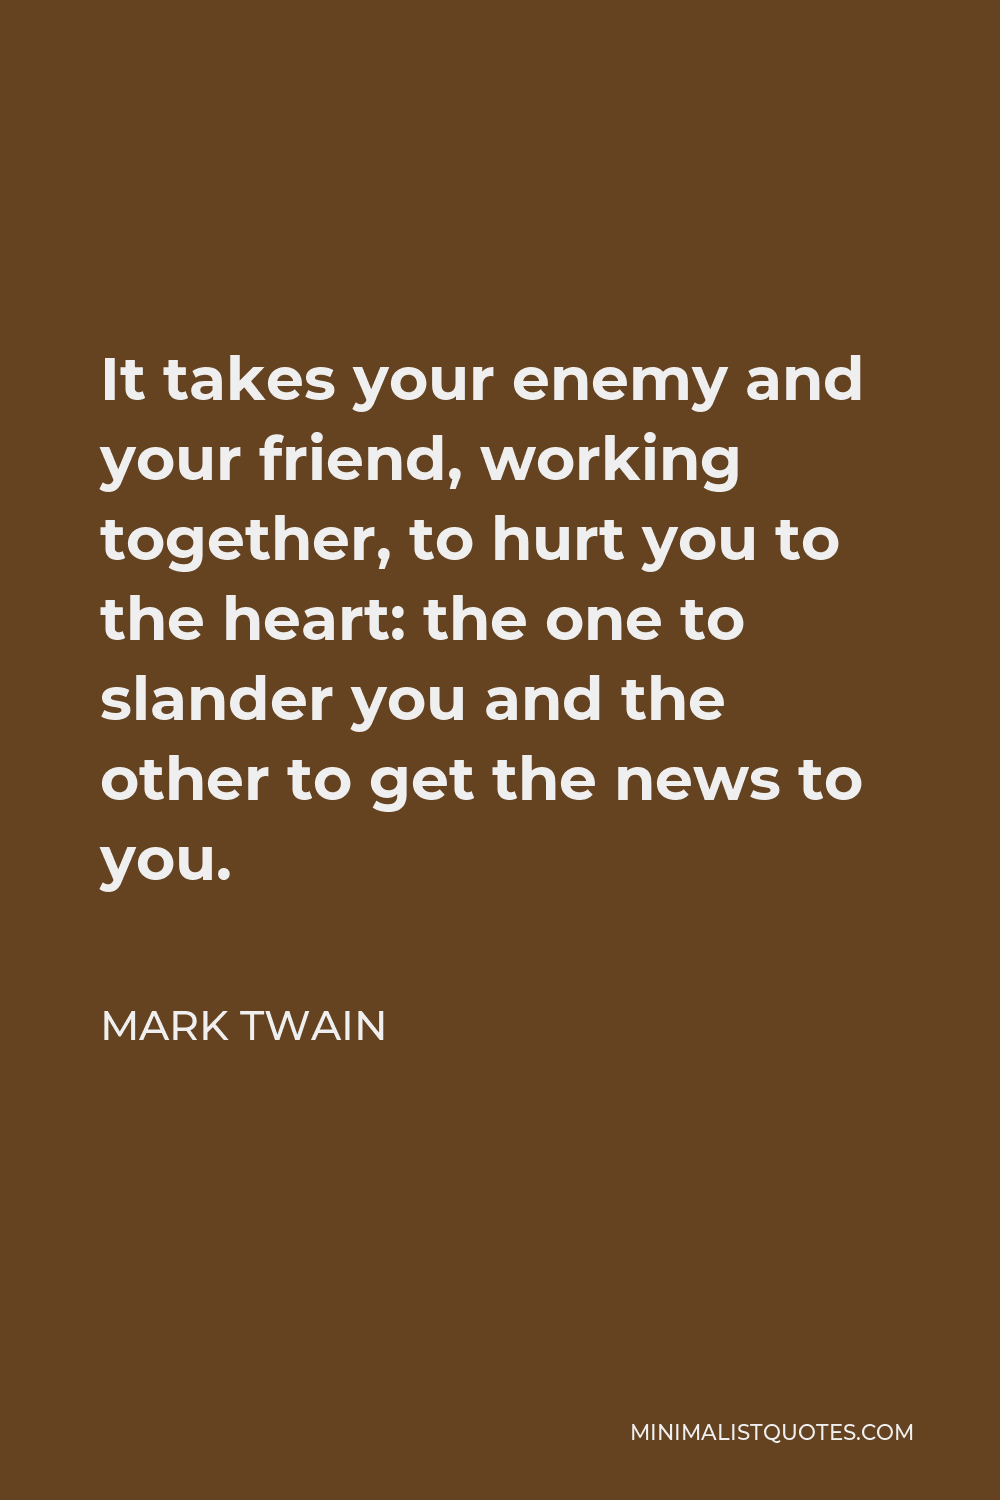 Mark Twain Quote - It takes your enemy and your friend, working together, to hurt you to the heart: the one to slander you and the other to get the news to you.